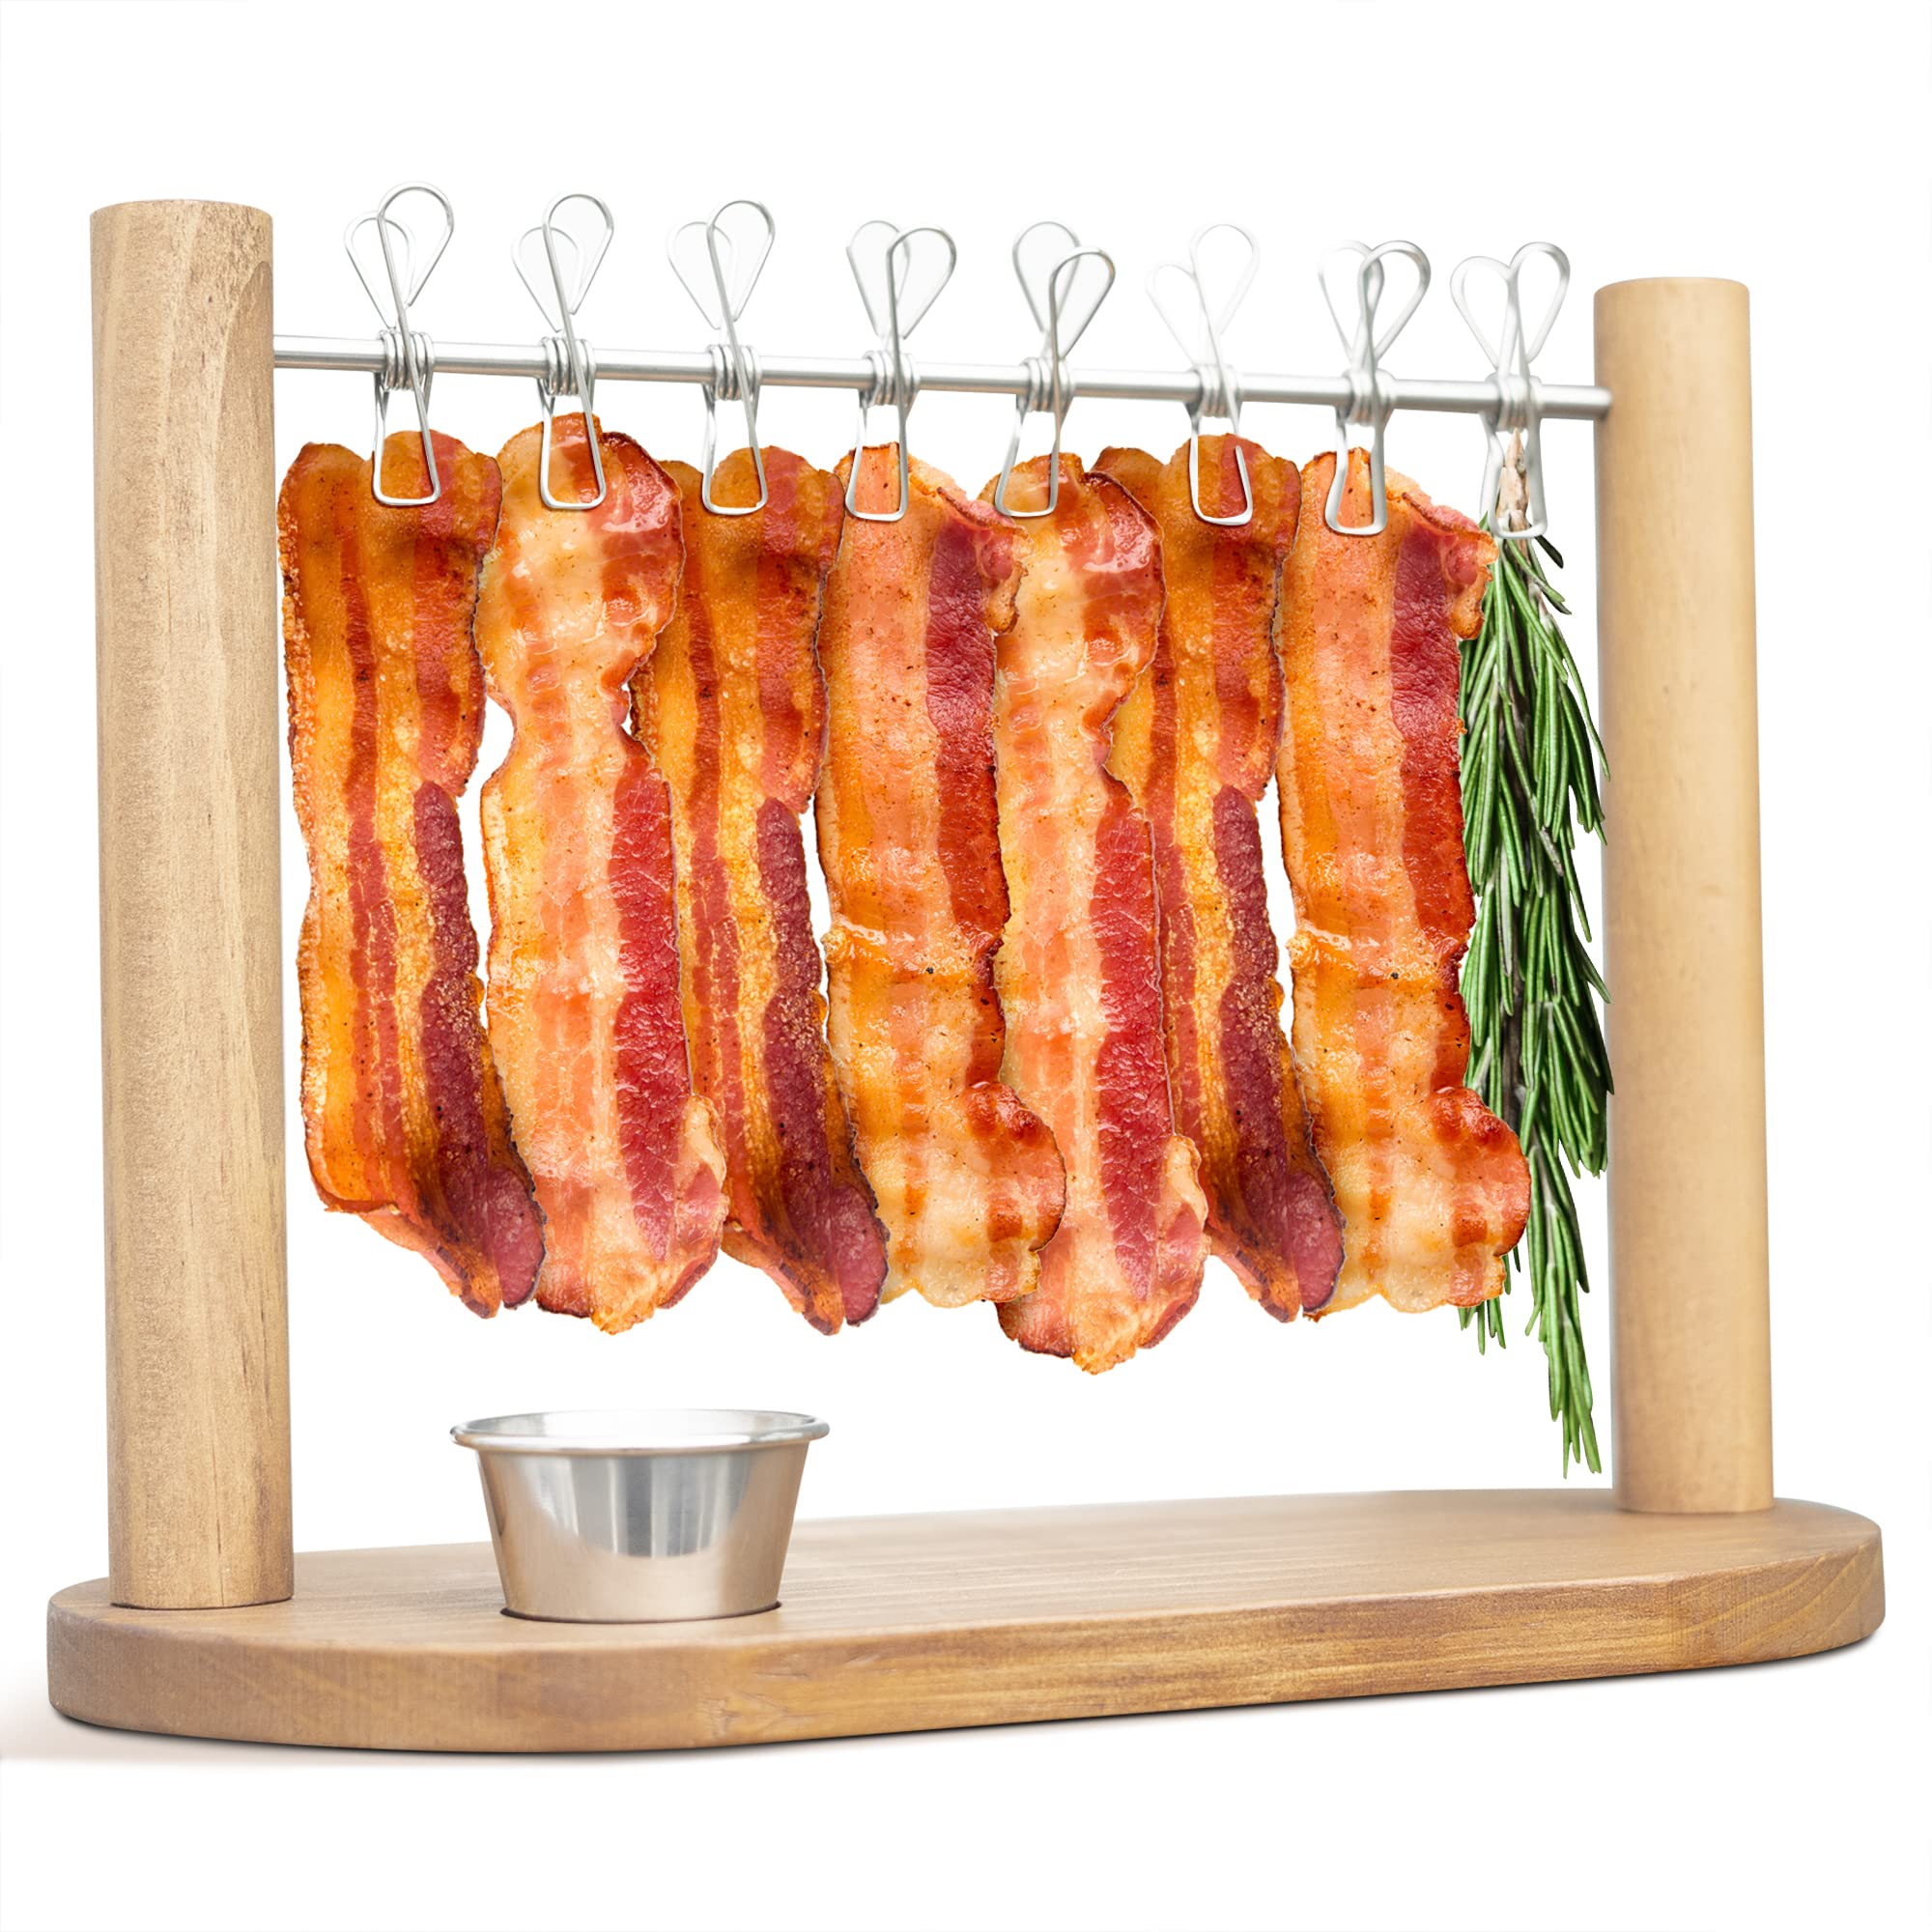 Bacon Serving Dishes for Entertaining - Pack of 5 Wooden Bacon Display for Men Who Have Everything or House Warming Gifts New